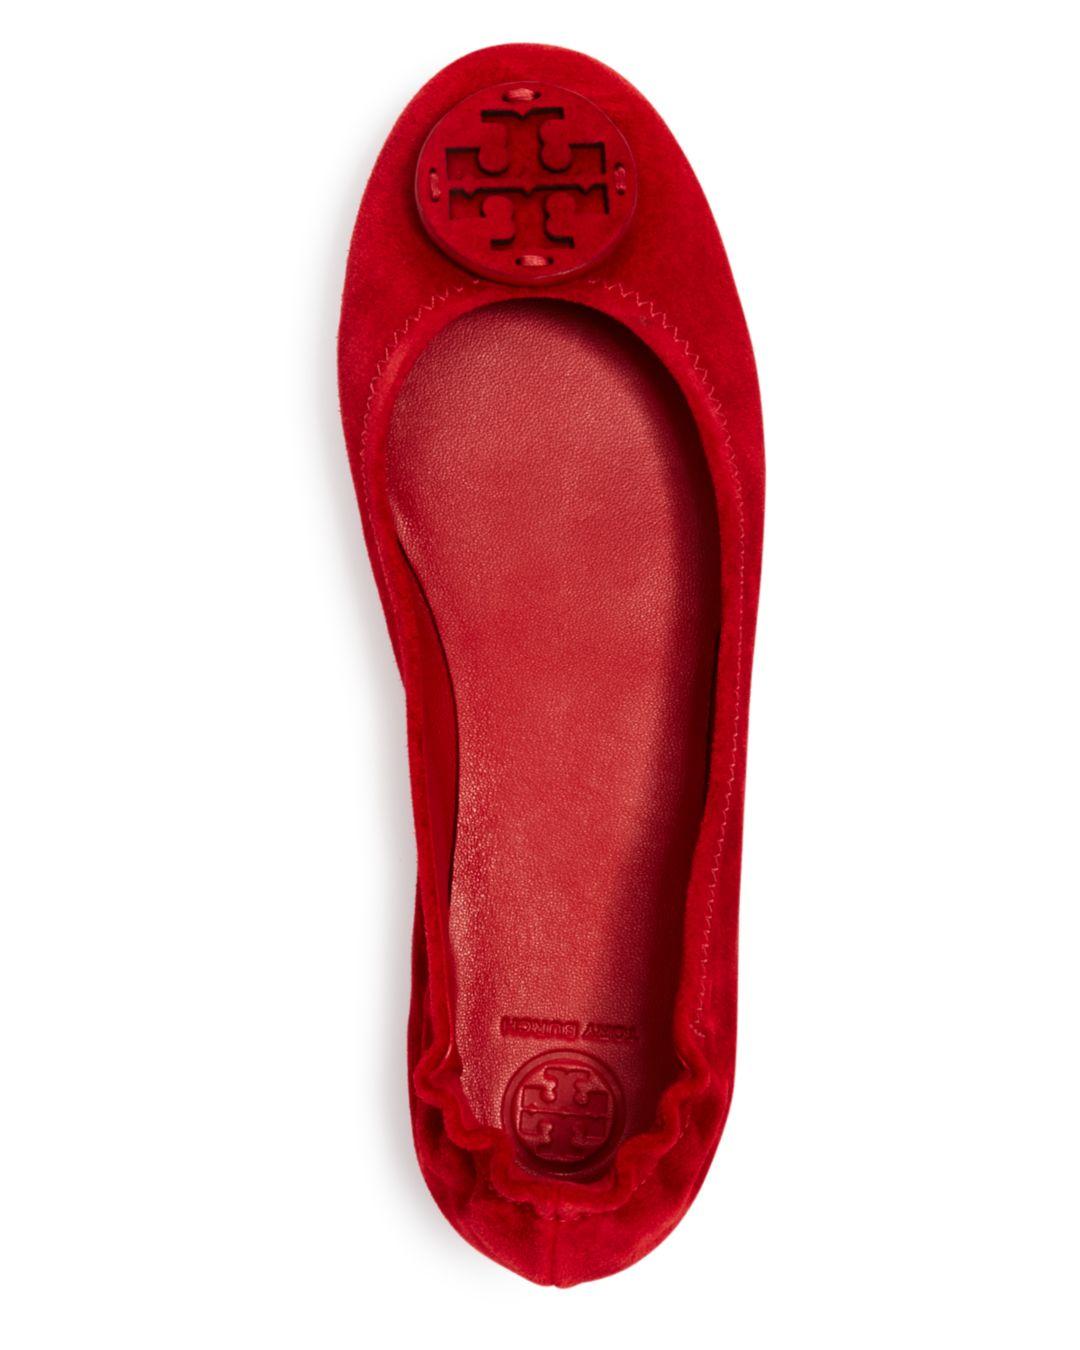 ruby red ballet flats